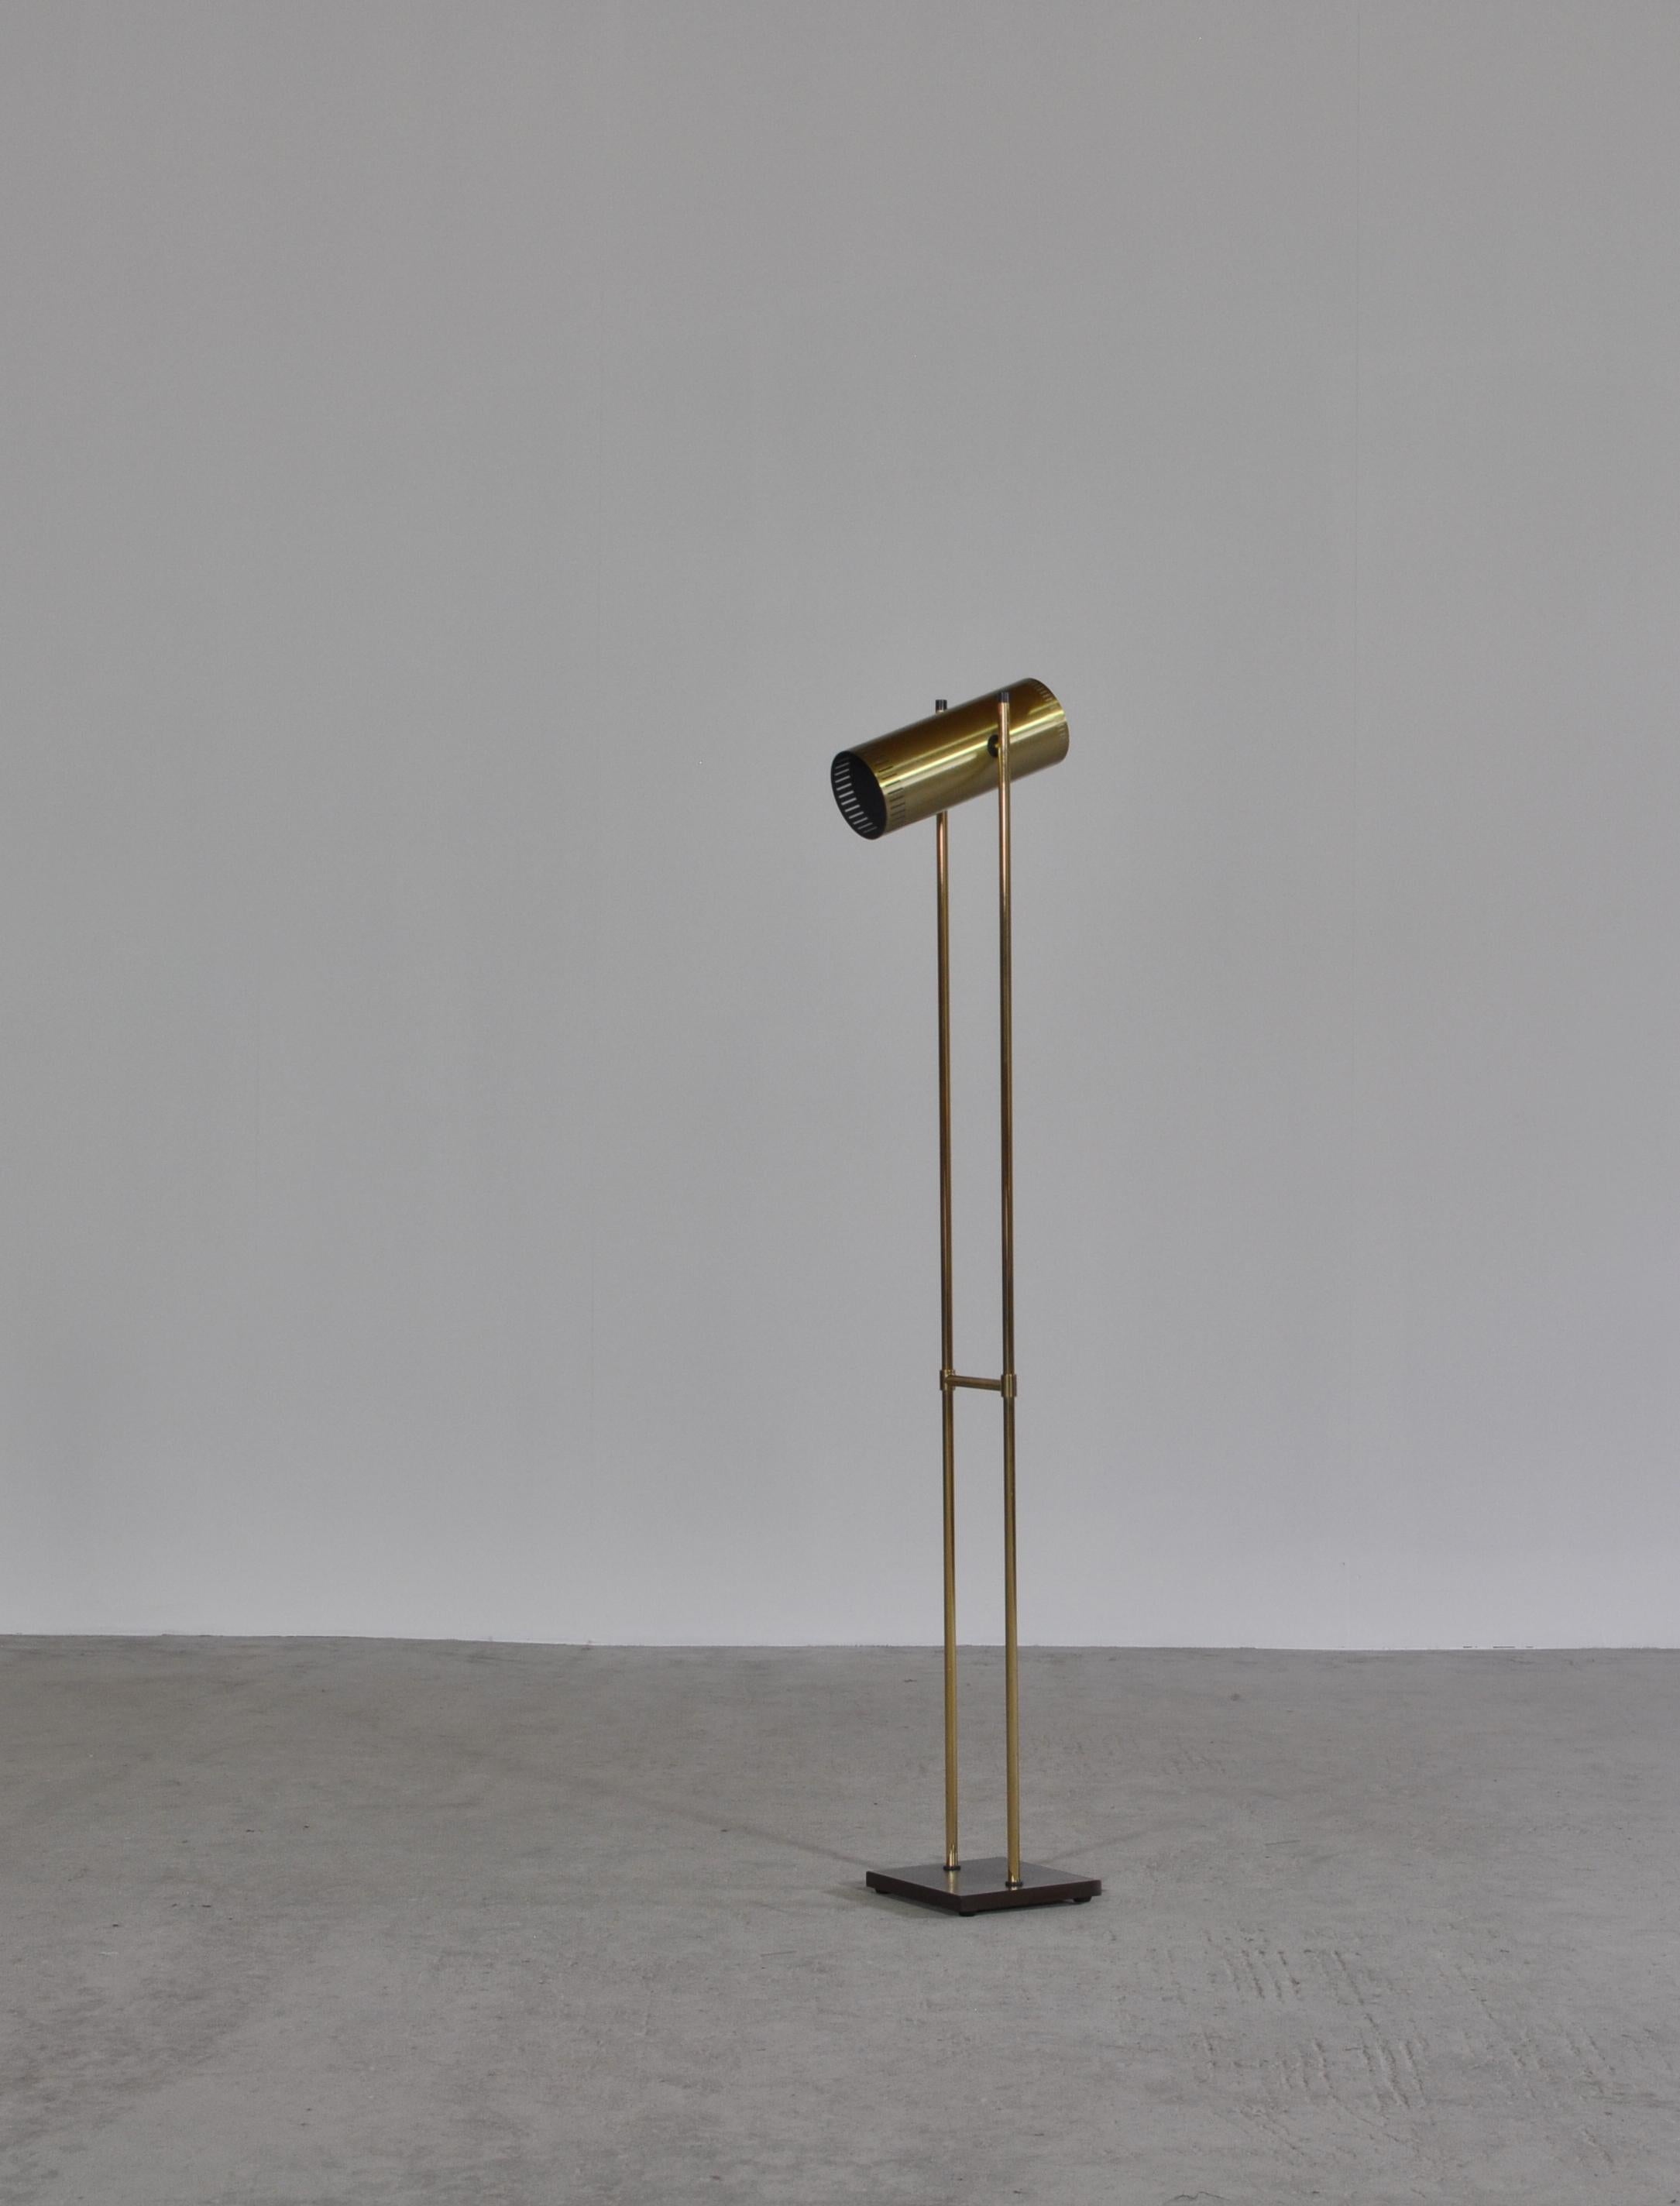 Elegant floor lamp in solid brass by Danish Designer Jo Hammerborg. The lamp shade is adjustable in all directions. It was manufactured by Fog & Morup in the late 1960s and the brass edition is a rare find today. Great vintage condition with label